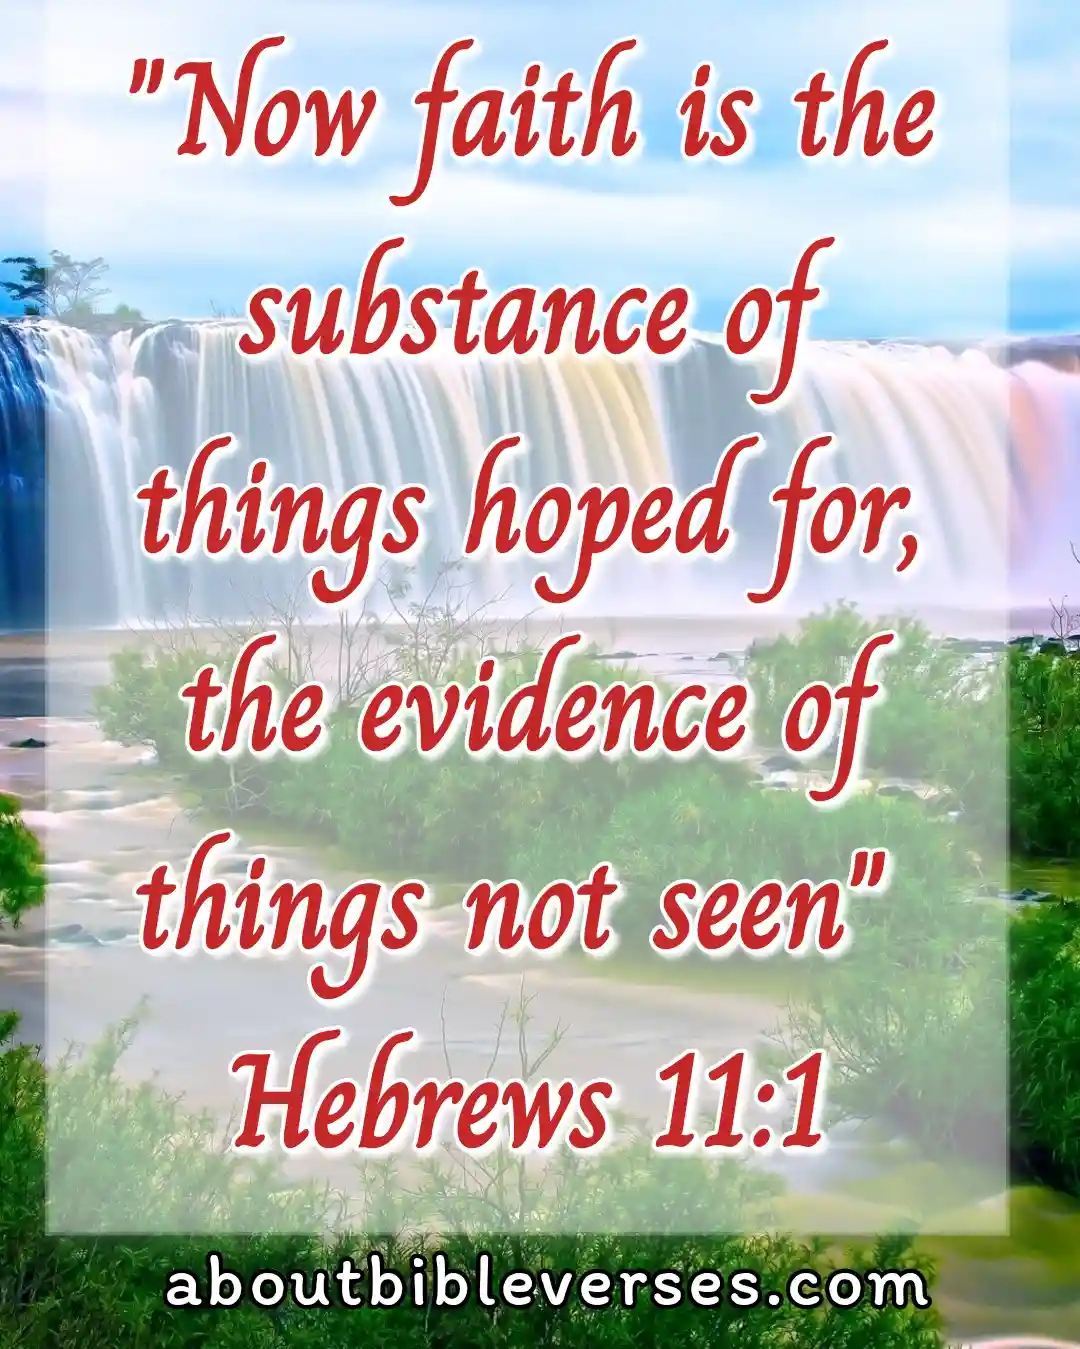 Bible Verses About Victory Over Sickness And Disease (Hebrews 11:1)